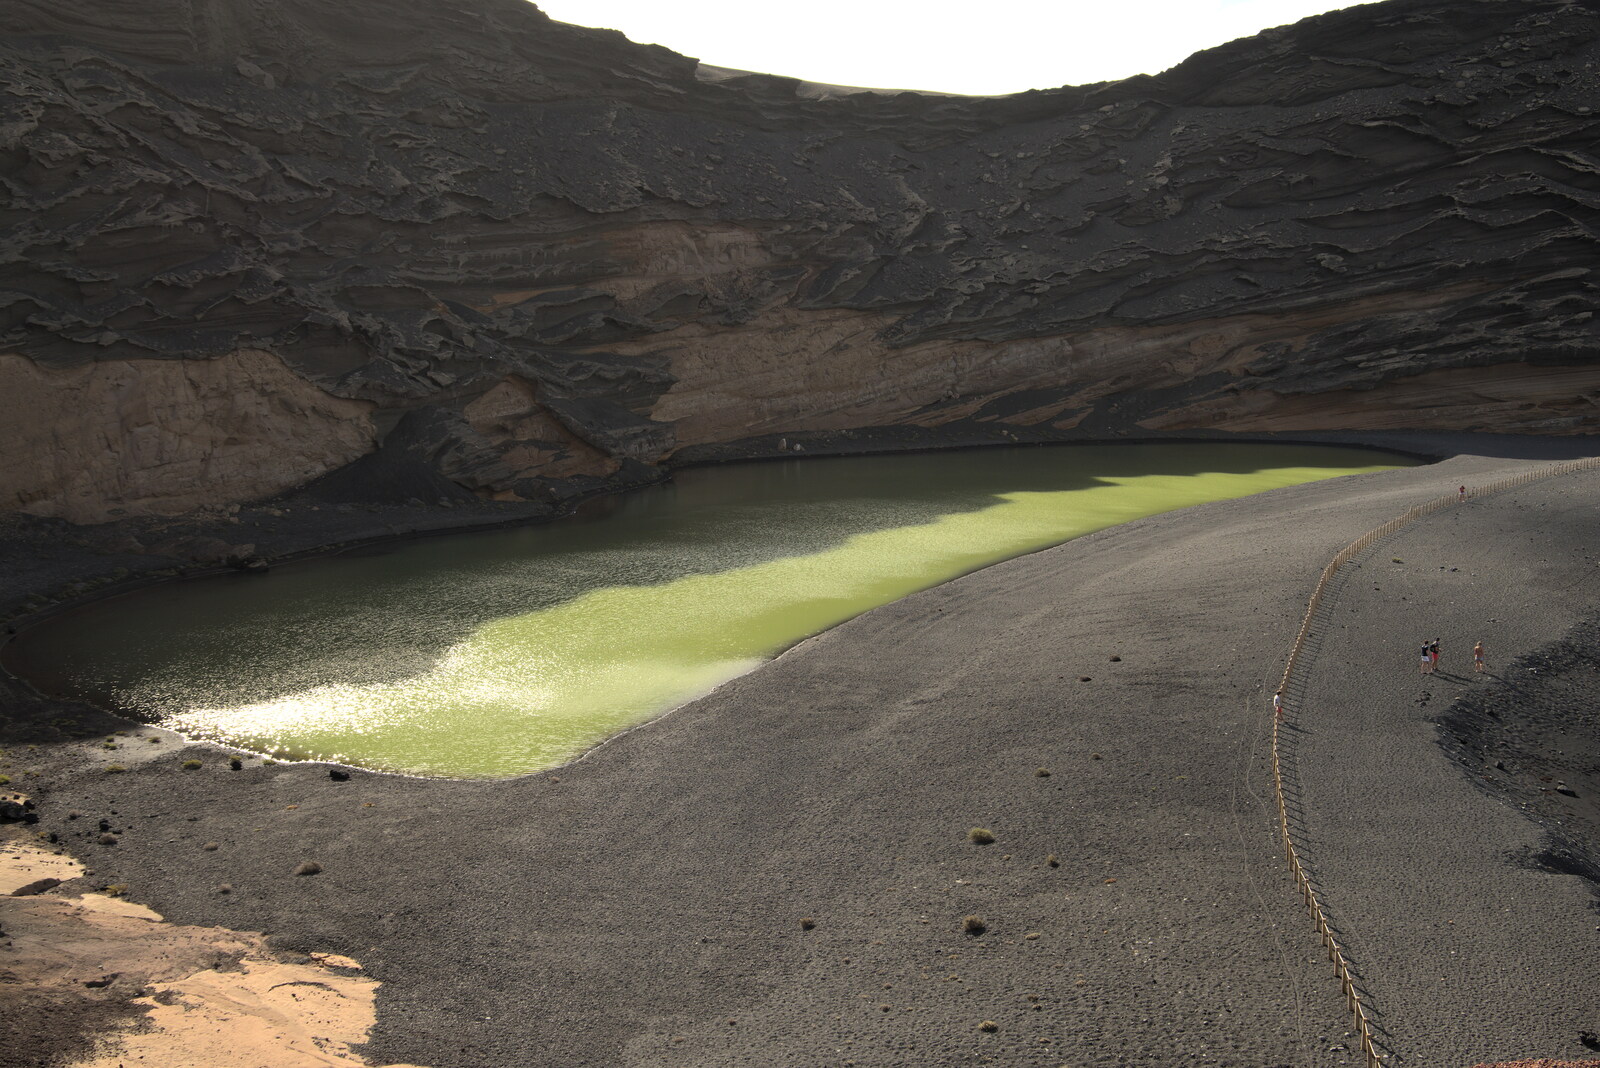 Green water in the volcano crater from The Volcanoes of Lanzarote, Canary Islands, Spain - 27th October 2021